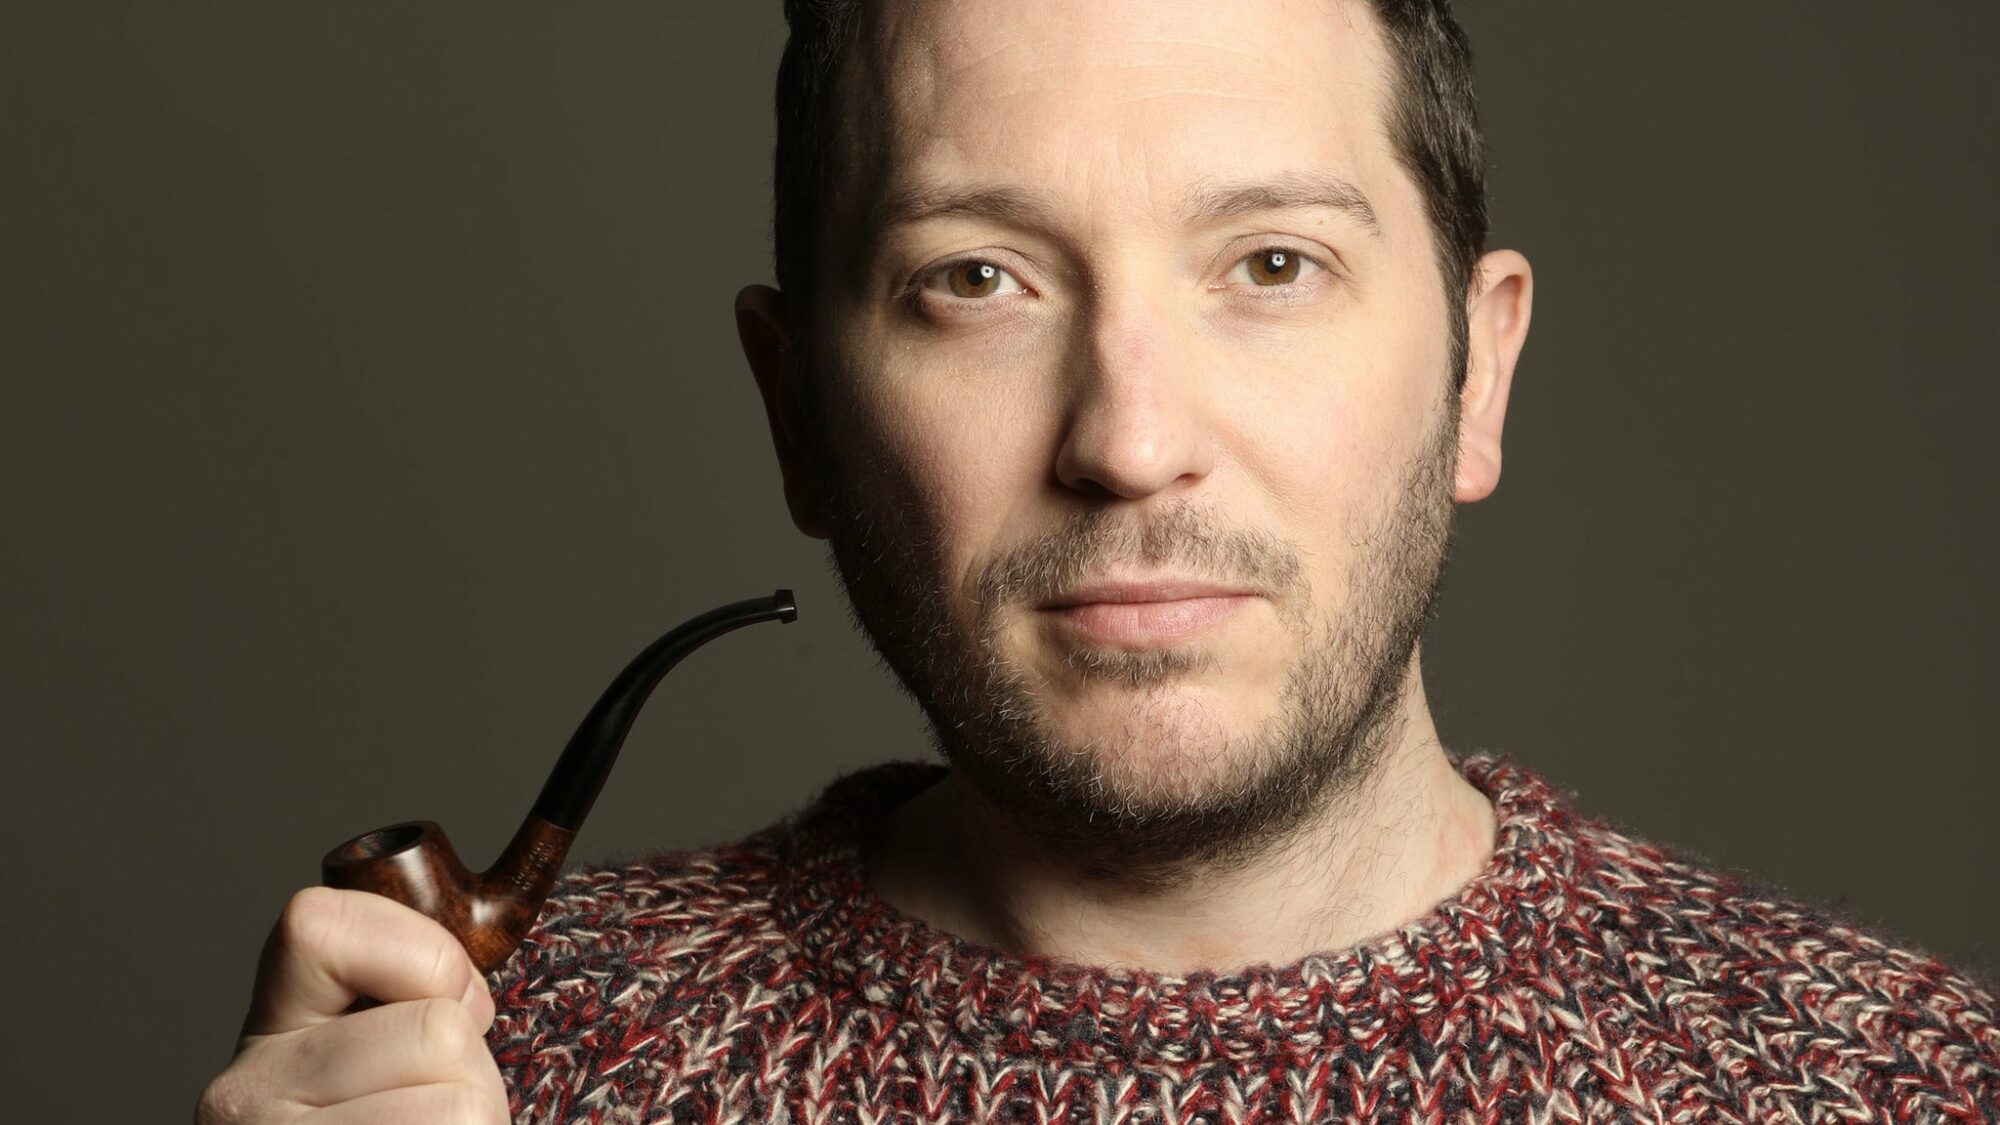 Image name Jon Richardson The Knitwit at Leeds Grand Theatre Leeds the 31 image from the post Jon Richardson: The Knitwit at St Georges Hall, Bradford, Bradford in Yorkshire.com.